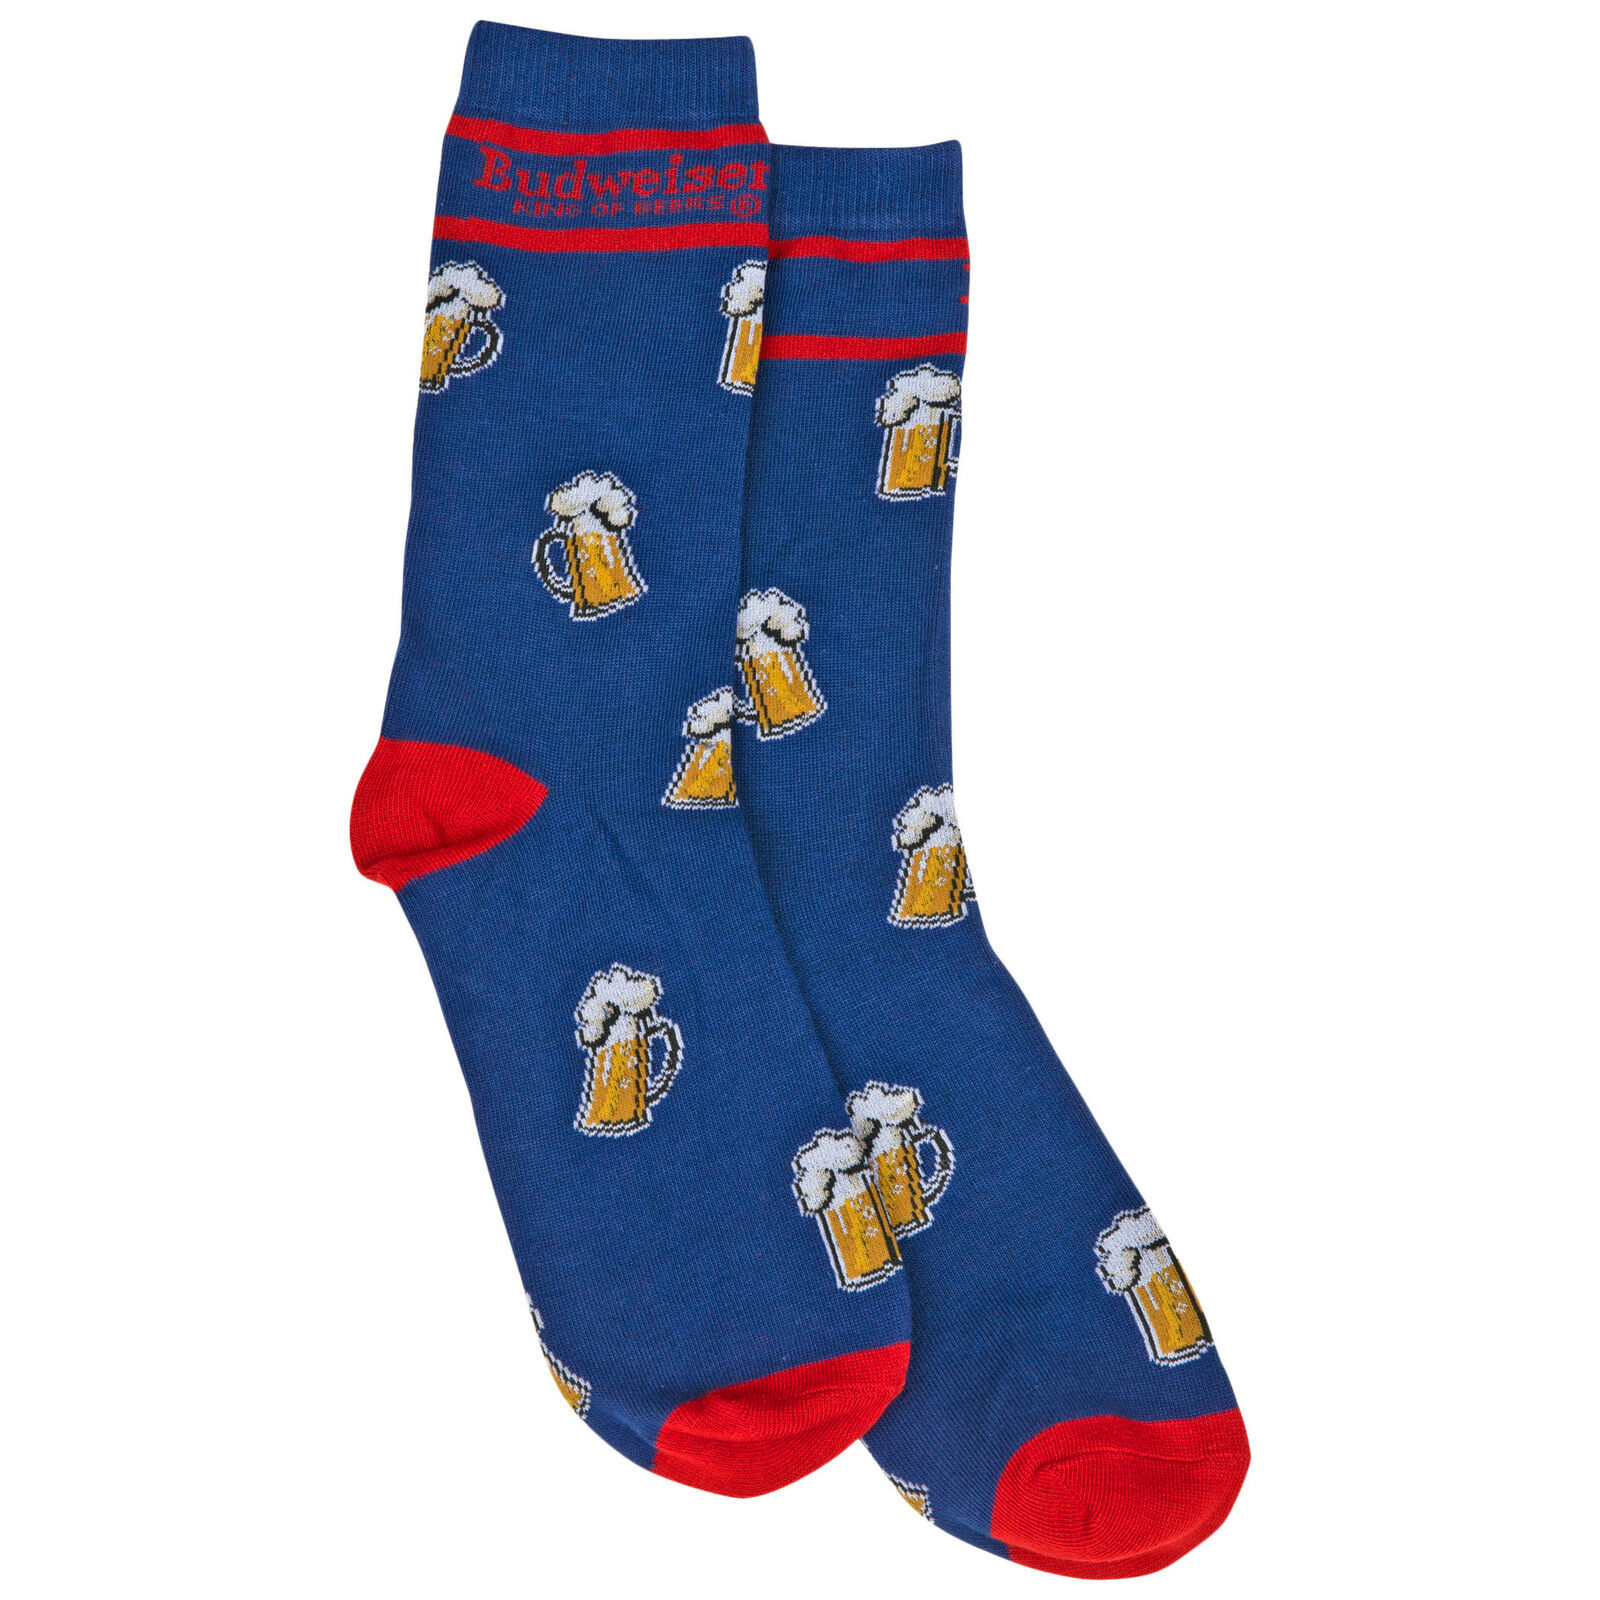 Primary image for Budweiser Logo and Foamy Mugs Crew Socks Blue